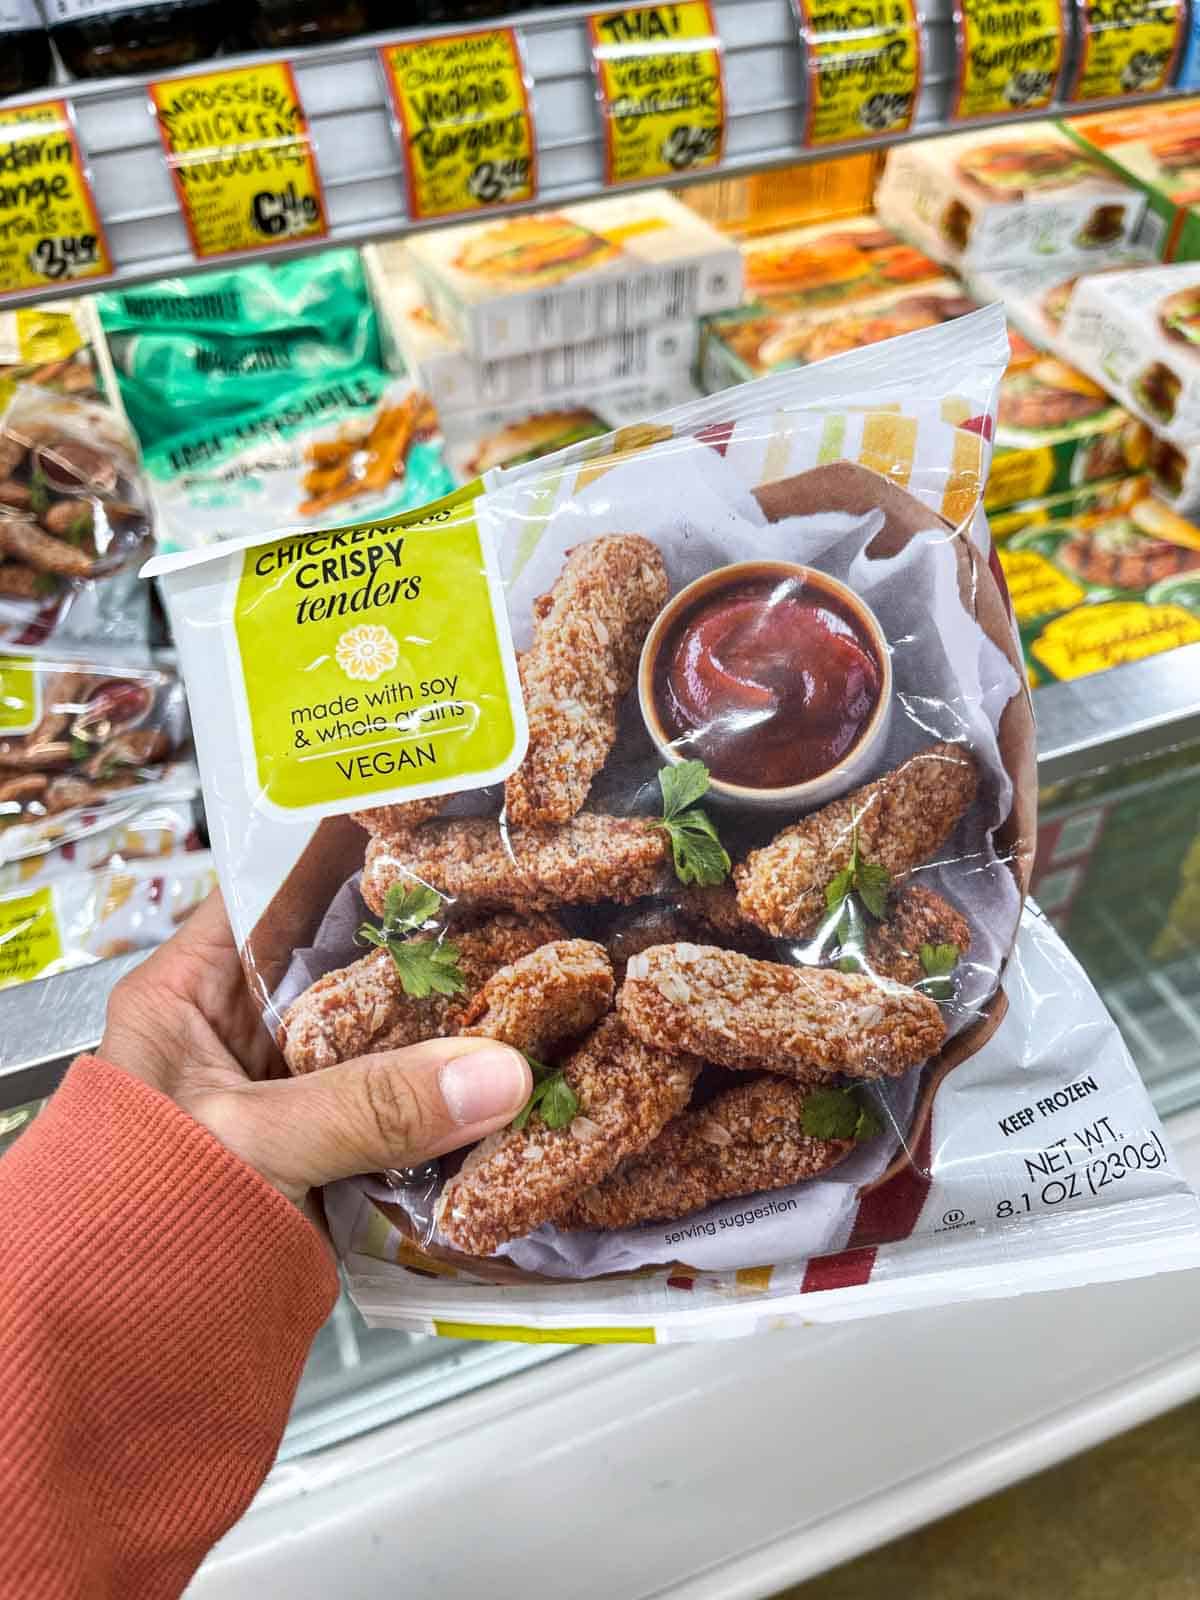 A hand holding a bag of vegan chickenless crispy tenders from the frozen section